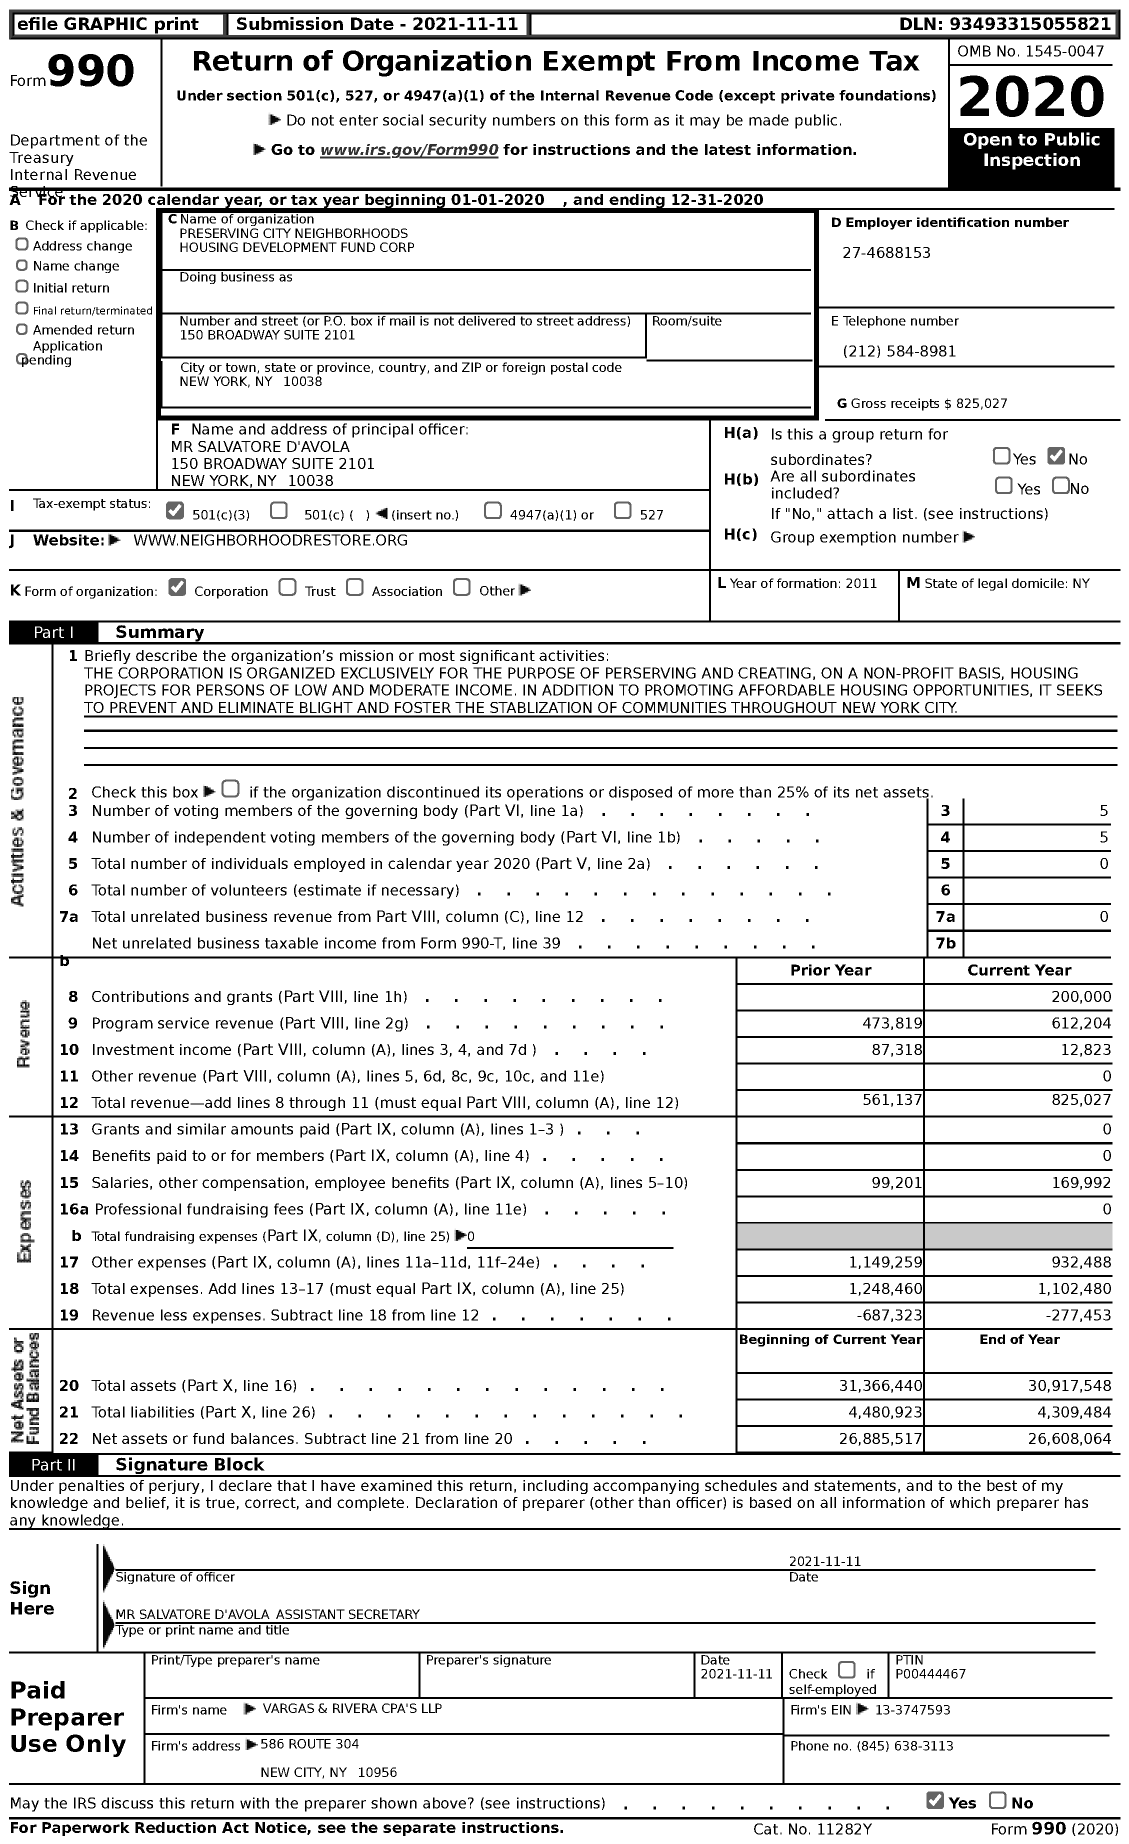 Image of first page of 2020 Form 990 for Preserving City Neighborhoods Housing Development Fund Corporation